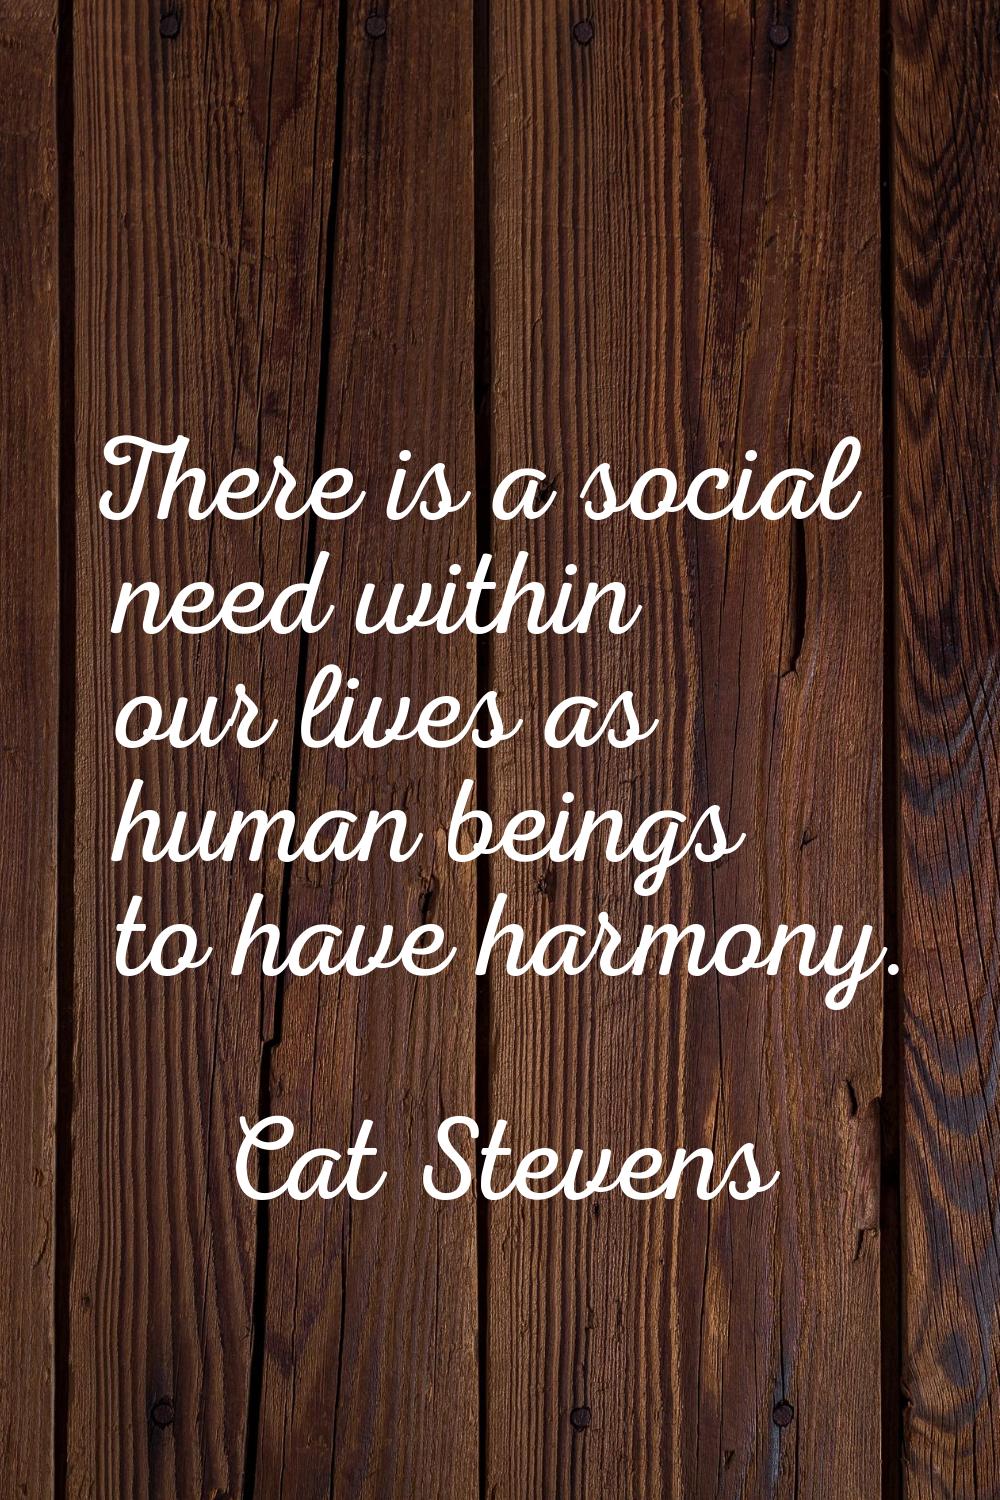 There is a social need within our lives as human beings to have harmony.